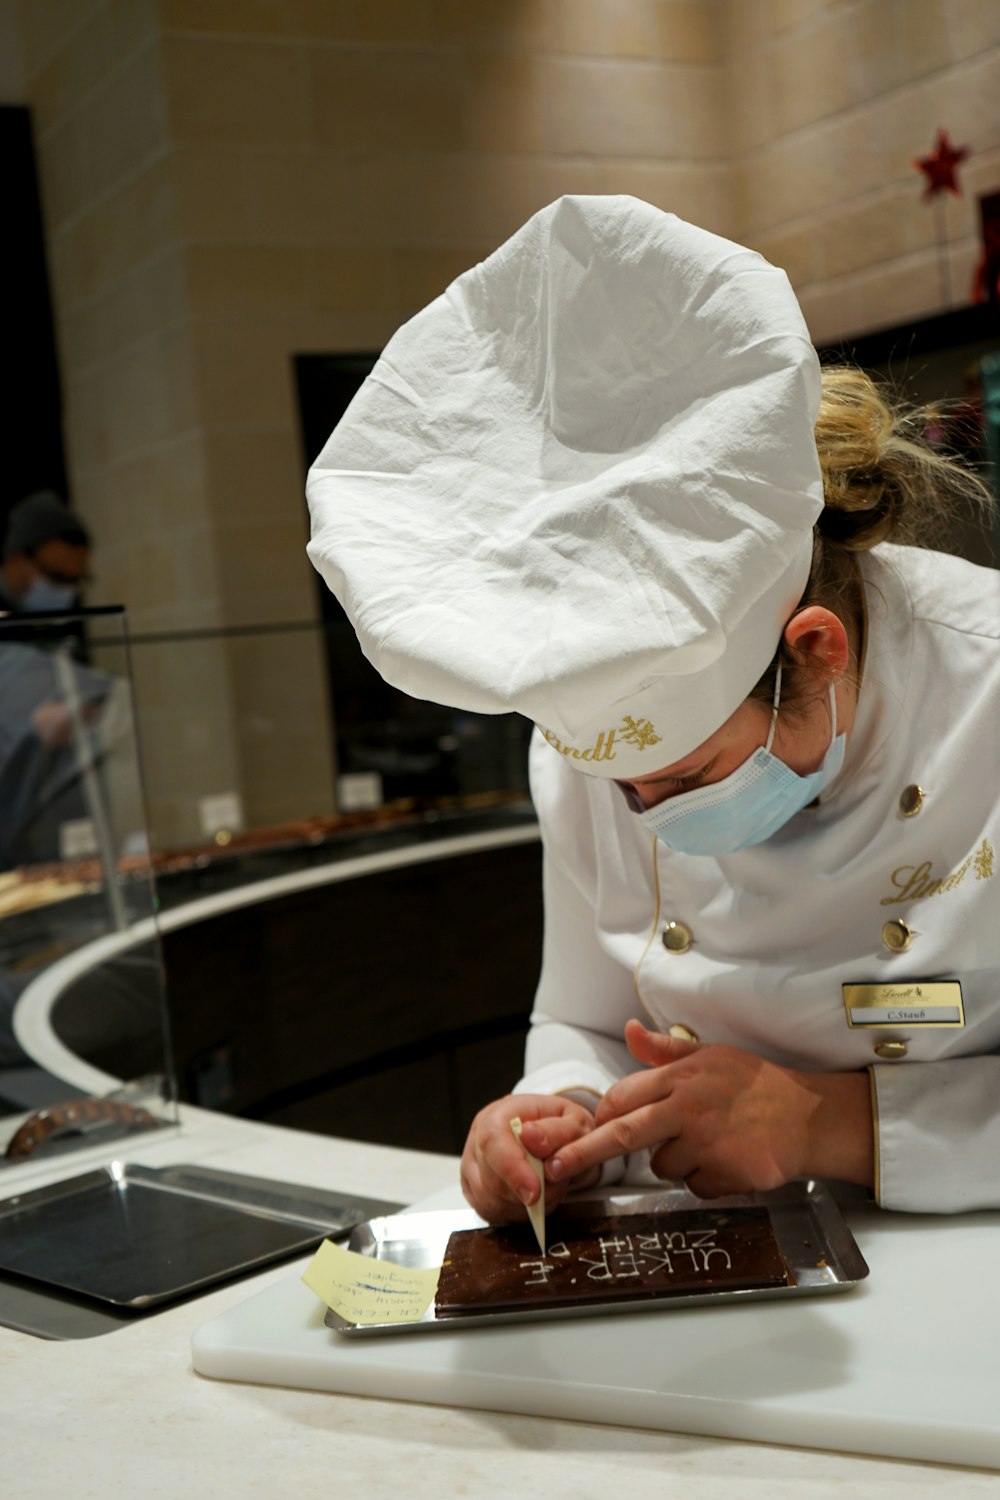 a woman in a chef's hat is cutting a piece of cake